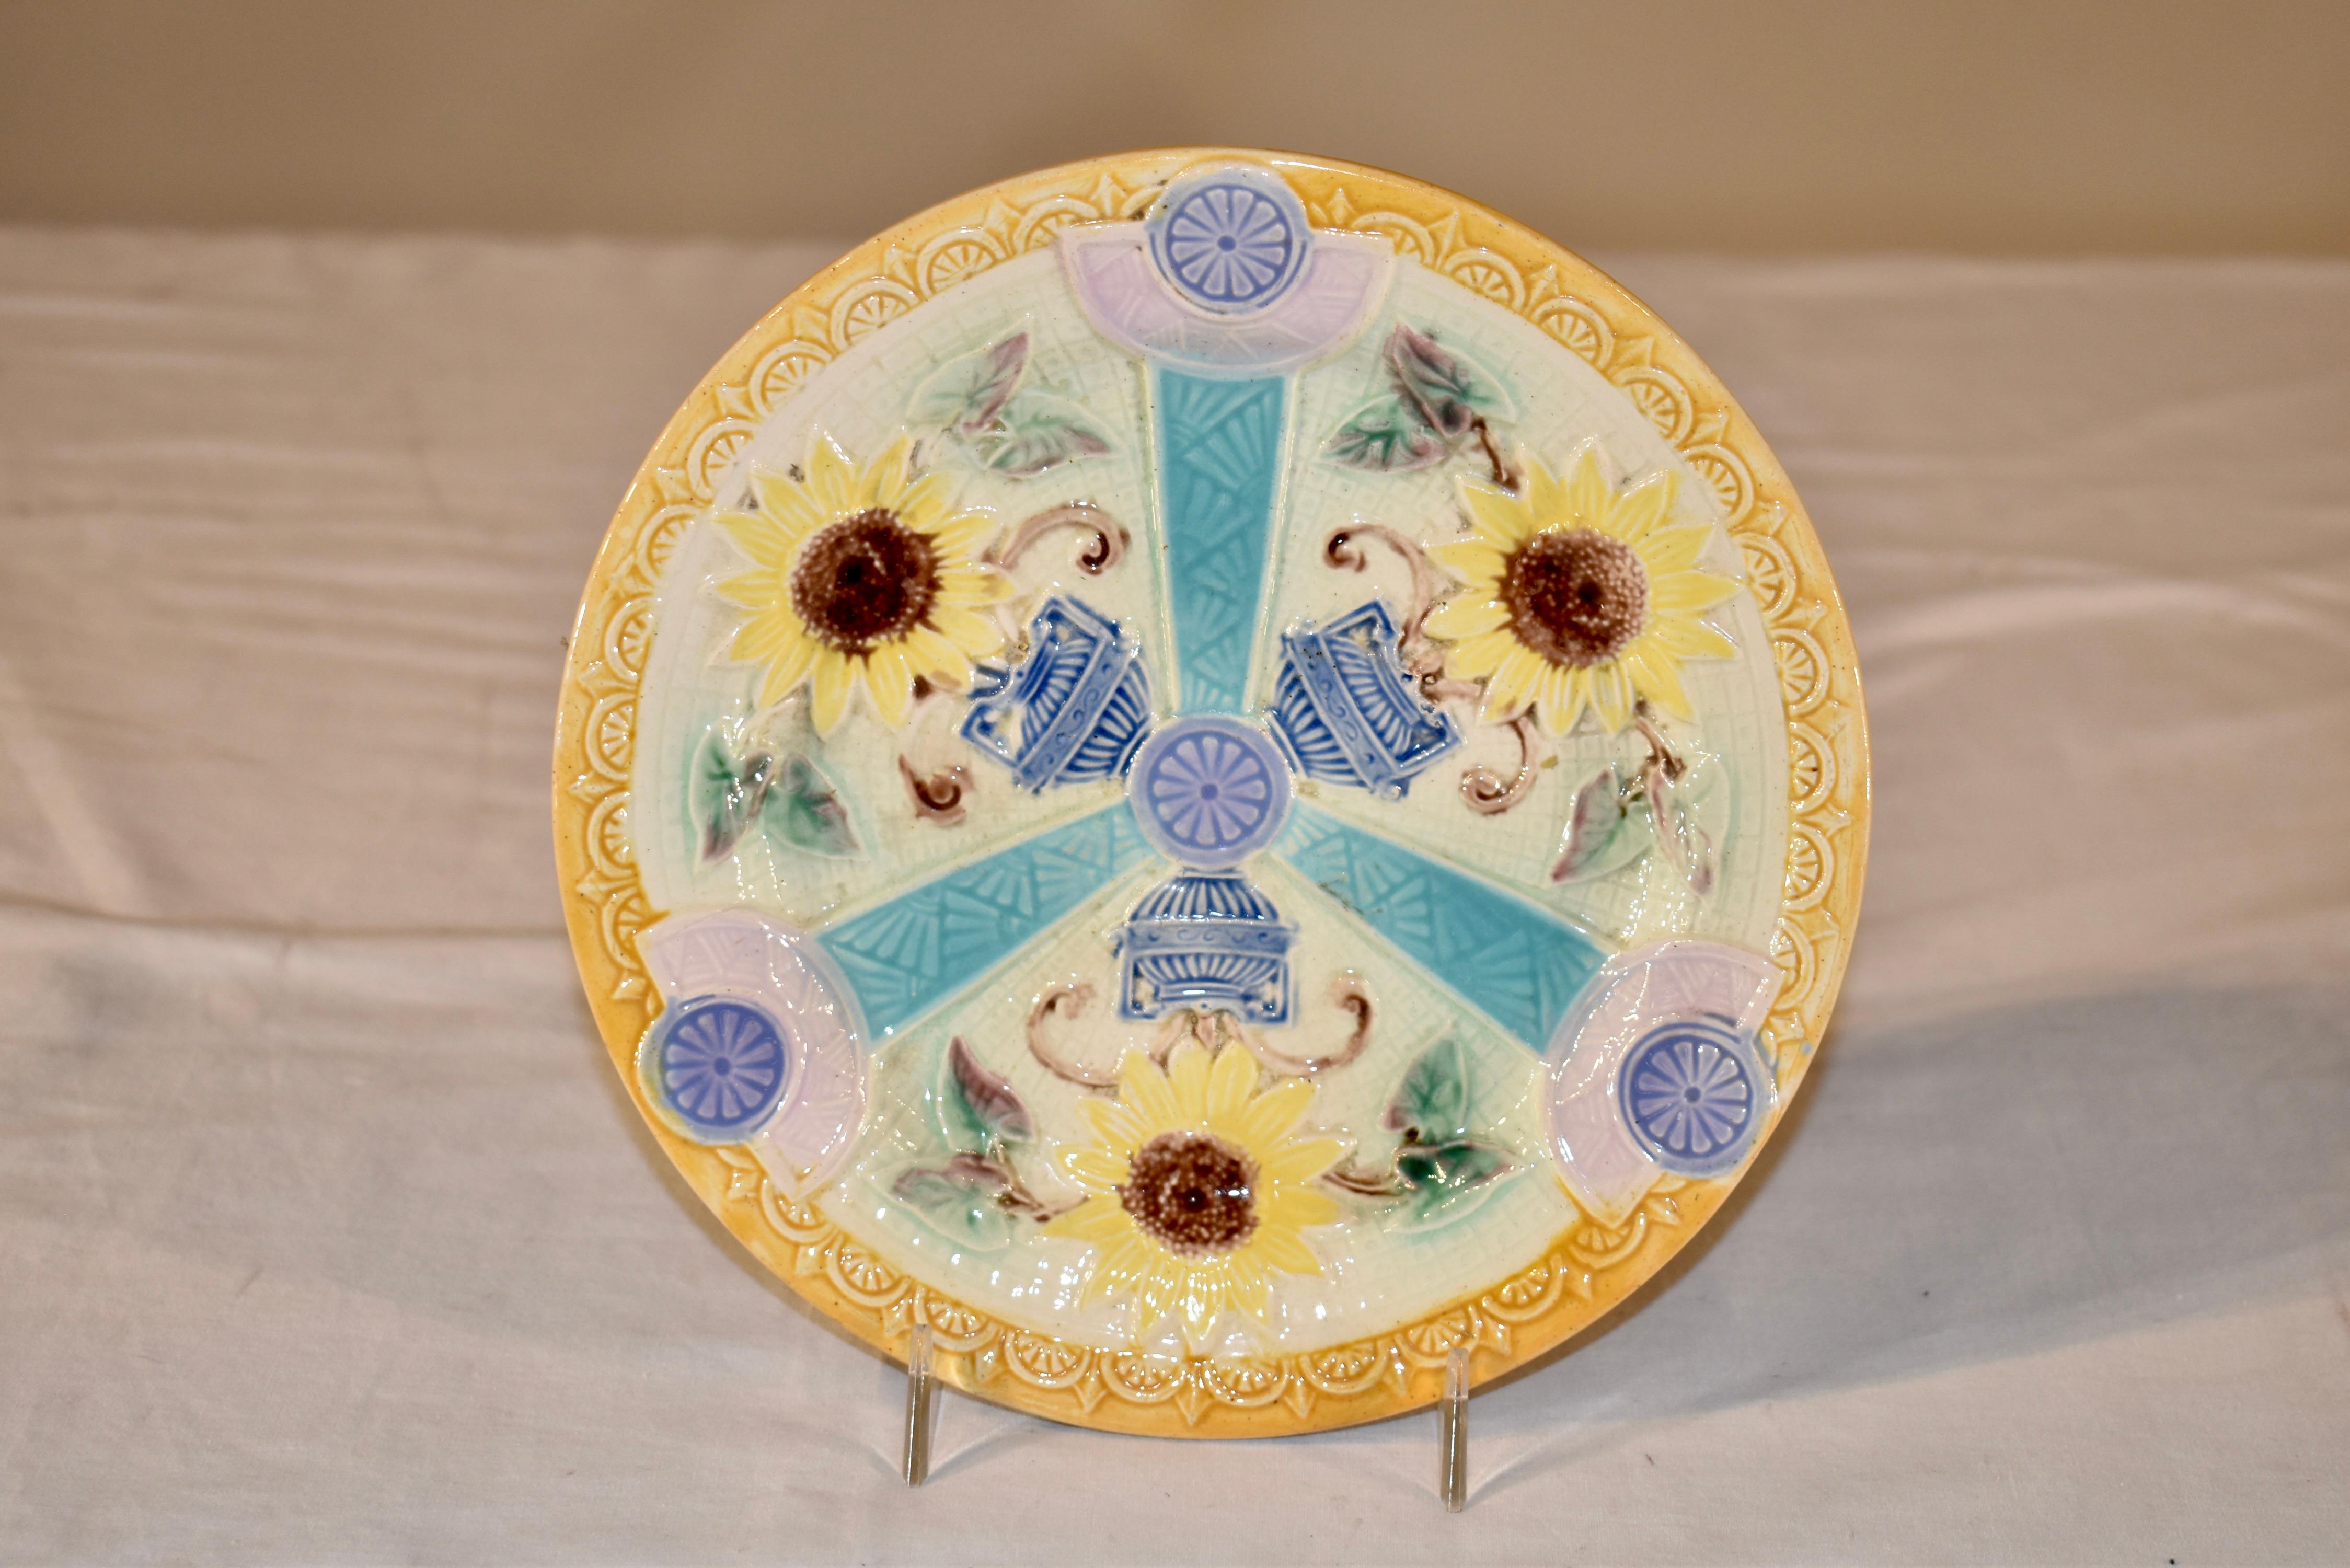 19th Century Majolica plate from England. The border is in a lovely yellow color, and surrounds three central urns with sunflowers, separated by Art Nouveau type patterns of fans and geometric patterns. The plate is marked on the back with a